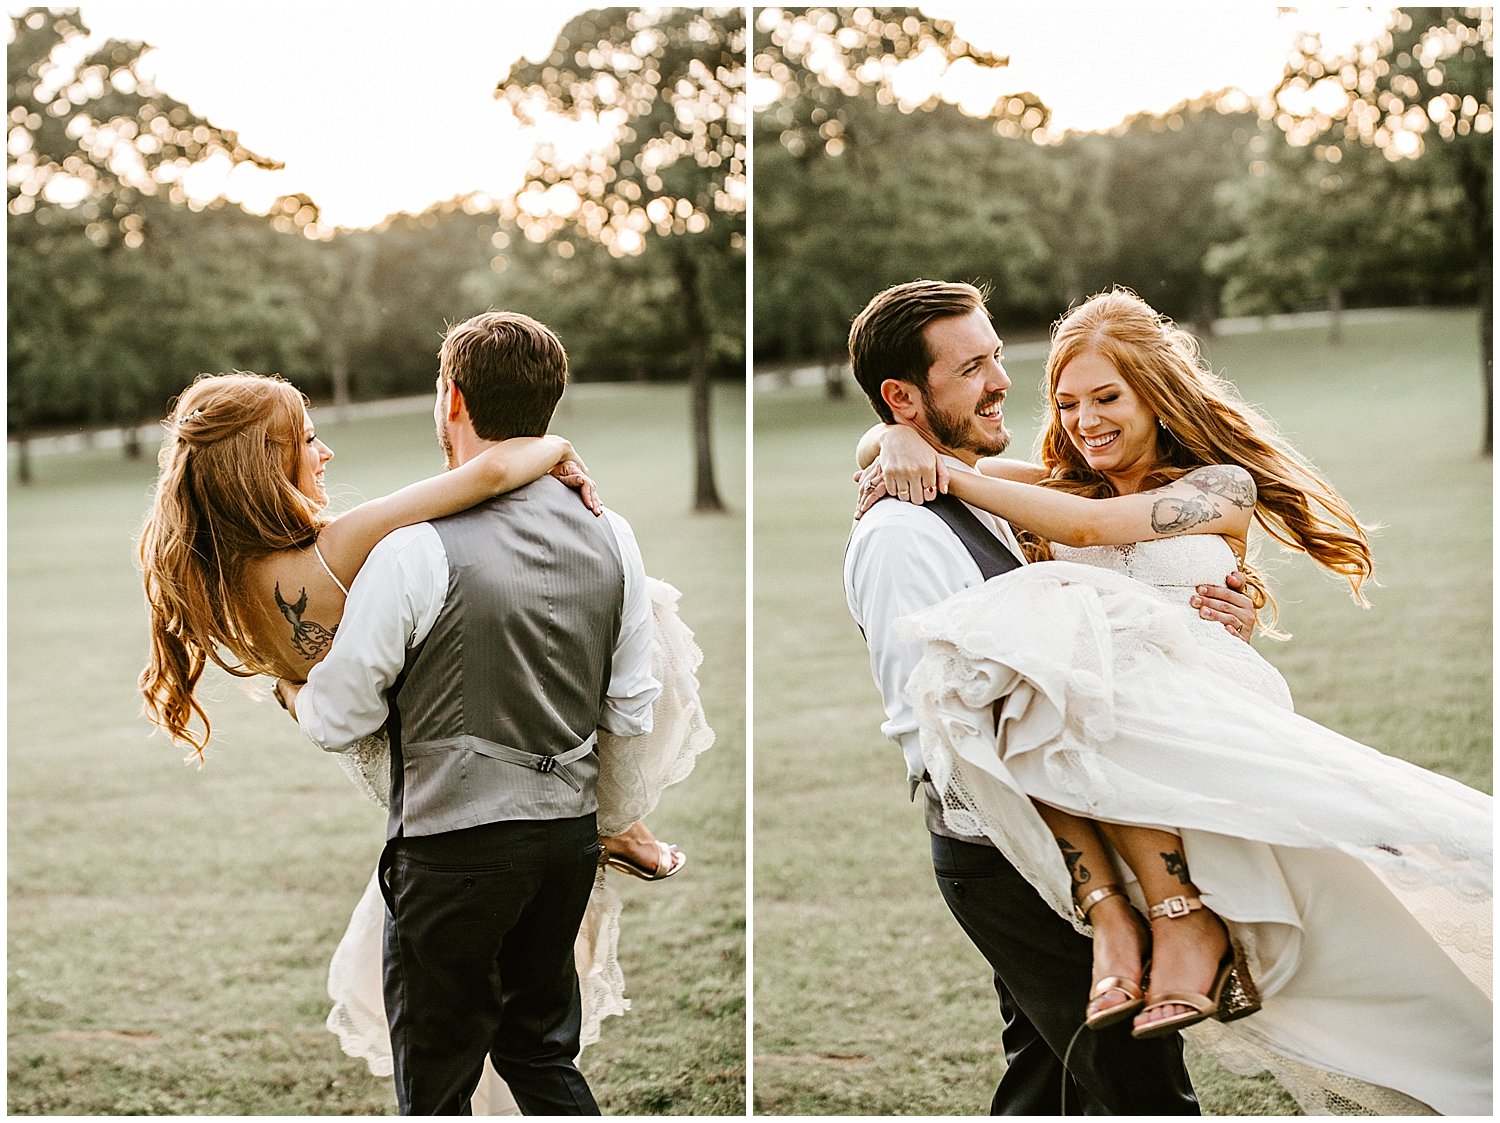 A collage of two pictures displaying a groom swaying the bride as he picks her up 